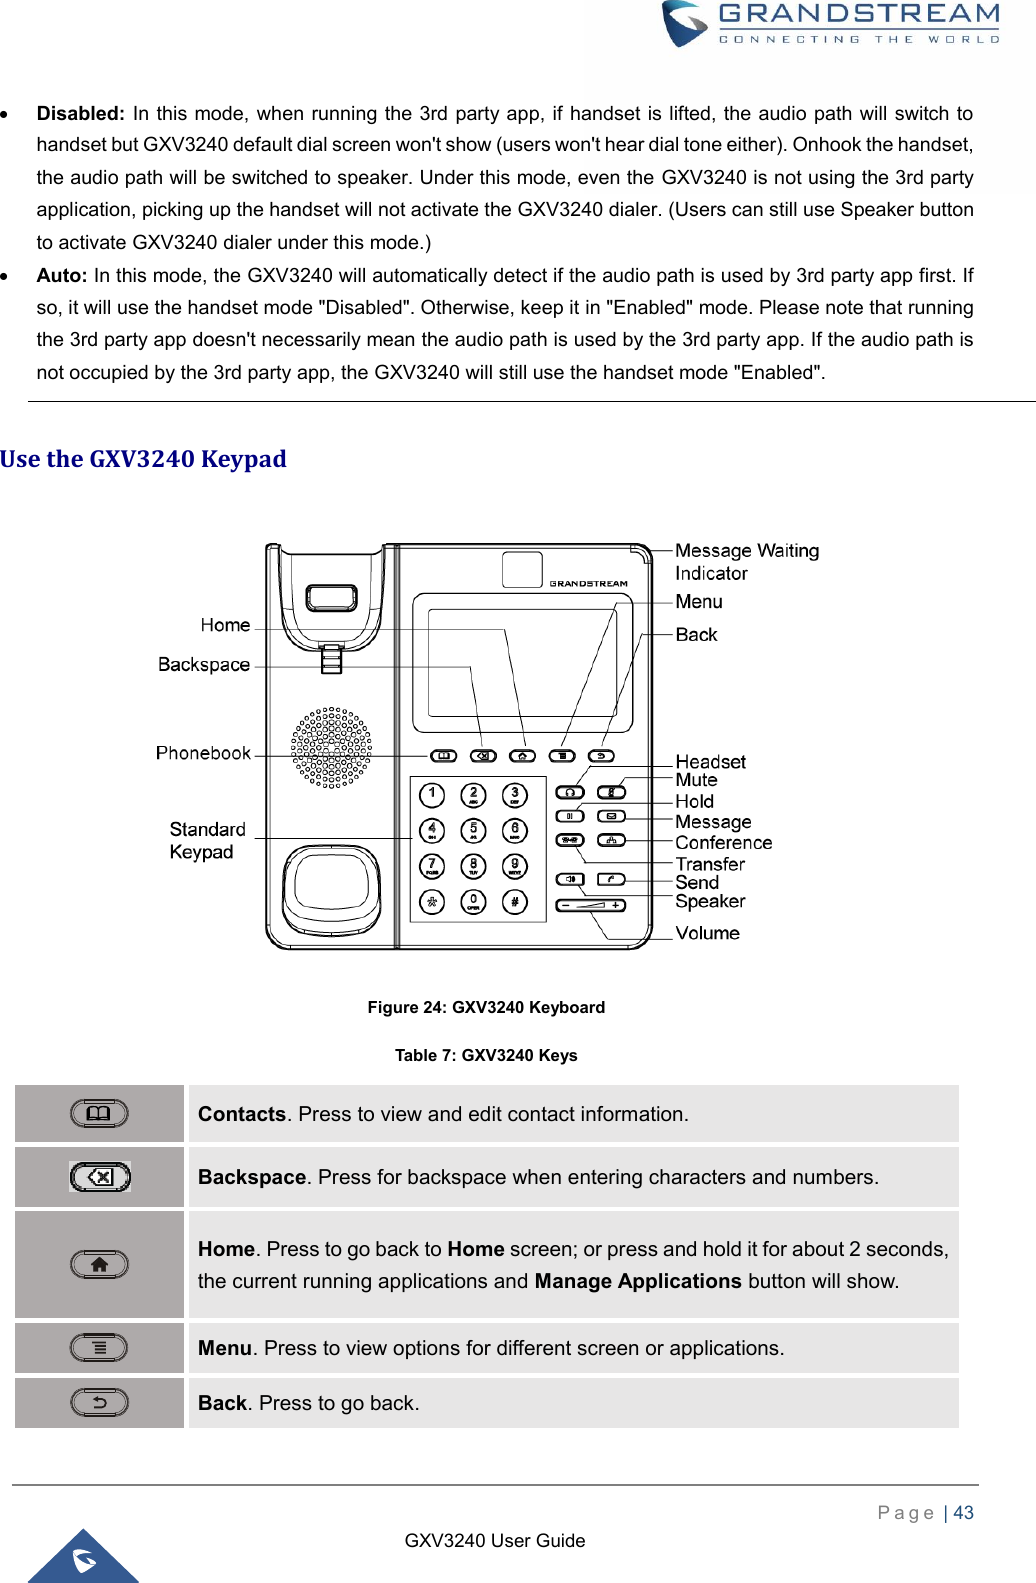    P a g e  | 43    GXV3240 User Guide   Disabled: In this mode, when running the 3rd party app, if handset is lifted, the audio path will switch to handset but GXV3240 default dial screen won&apos;t show (users won&apos;t hear dial tone either). Onhook the handset, the audio path will be switched to speaker. Under this mode, even the GXV3240 is not using the 3rd party application, picking up the handset will not activate the GXV3240 dialer. (Users can still use Speaker button to activate GXV3240 dialer under this mode.)  Auto: In this mode, the GXV3240 will automatically detect if the audio path is used by 3rd party app first. If so, it will use the handset mode &quot;Disabled&quot;. Otherwise, keep it in &quot;Enabled&quot; mode. Please note that running the 3rd party app doesn&apos;t necessarily mean the audio path is used by the 3rd party app. If the audio path is not occupied by the 3rd party app, the GXV3240 will still use the handset mode &quot;Enabled&quot;.  Use the GXV3240 Keypad  Figure 24: GXV3240 Keyboard Table 7: GXV3240 Keys  Contacts. Press to view and edit contact information.  Backspace. Press for backspace when entering characters and numbers.  Home. Press to go back to Home screen; or press and hold it for about 2 seconds, the current running applications and Manage Applications button will show.  Menu. Press to view options for different screen or applications.  Back. Press to go back. 